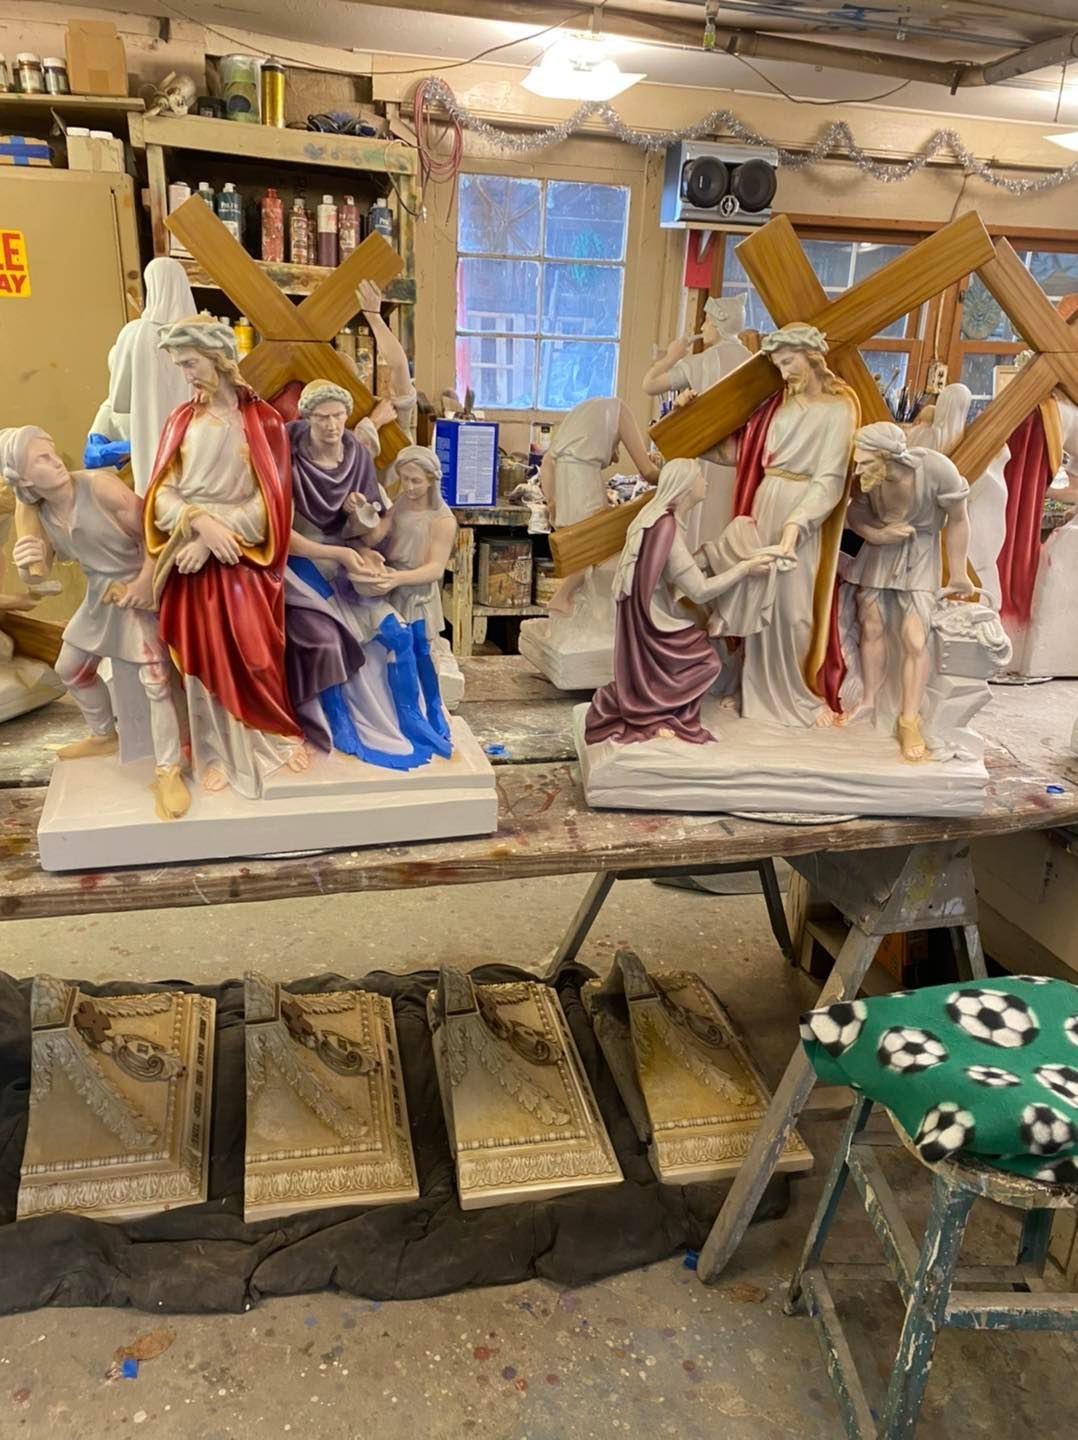 Work commences on restoring the Stations of the Cross from St. Joseph Parish in Palmyra in the studio of Autenrieb Murals & Statue Restoration in Edwardsville, Illinois, in this Jan. 22, 2022, photo.